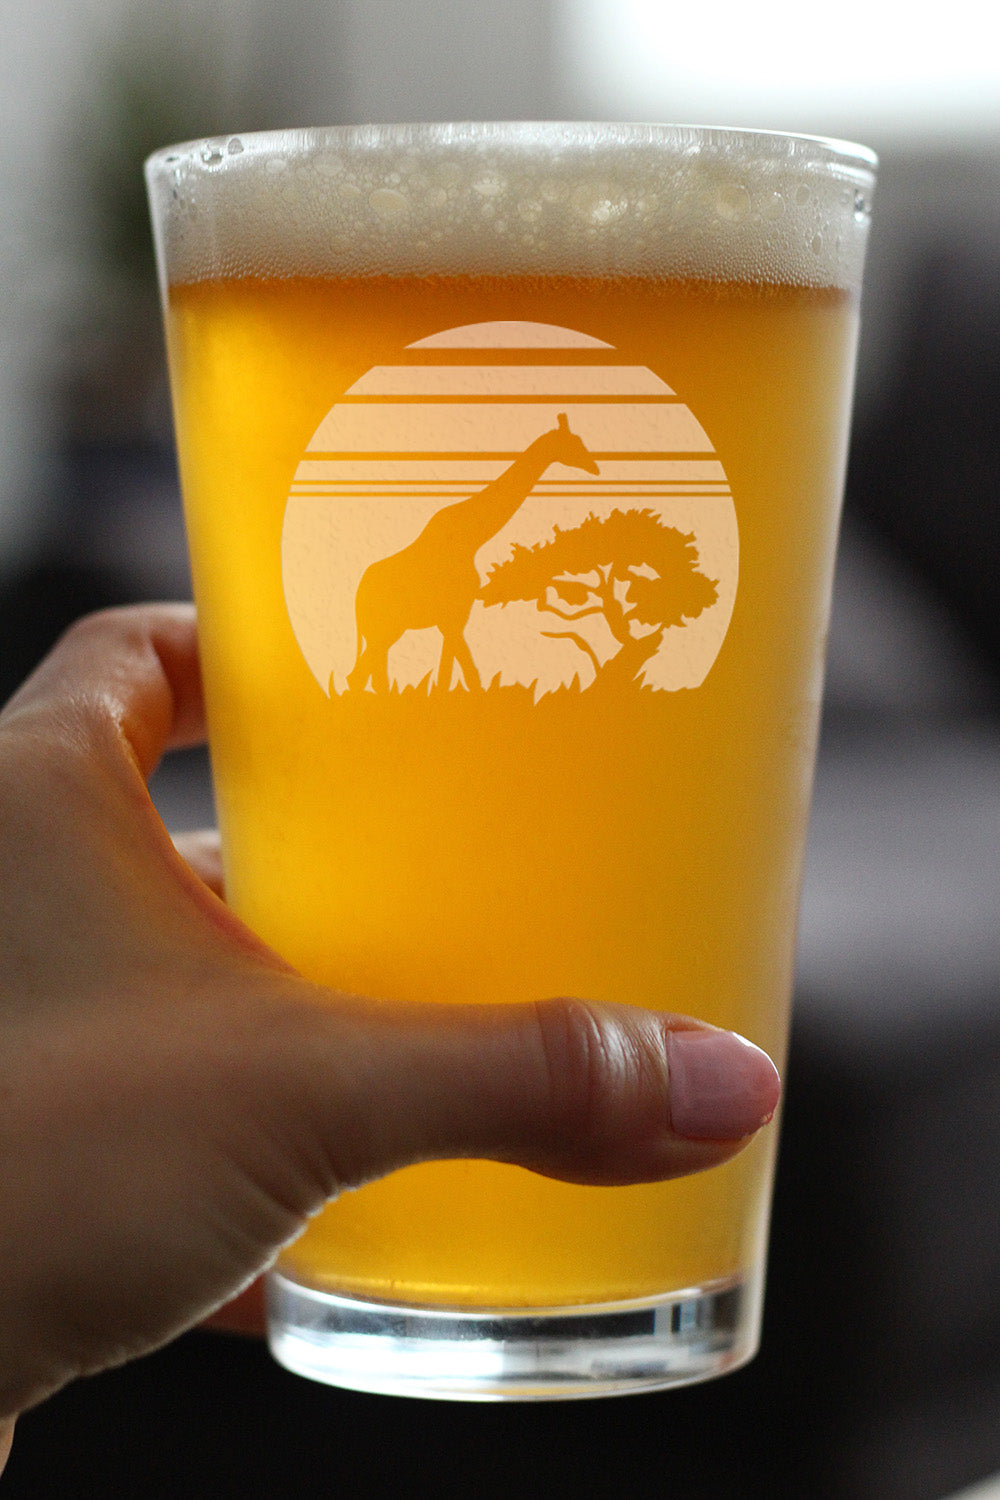 Giraffe Sunset Pint Glass for Beer - Fun Safari Themed Decor and Gifts for Lovers of African Wild Animals - 16 Oz Glasses